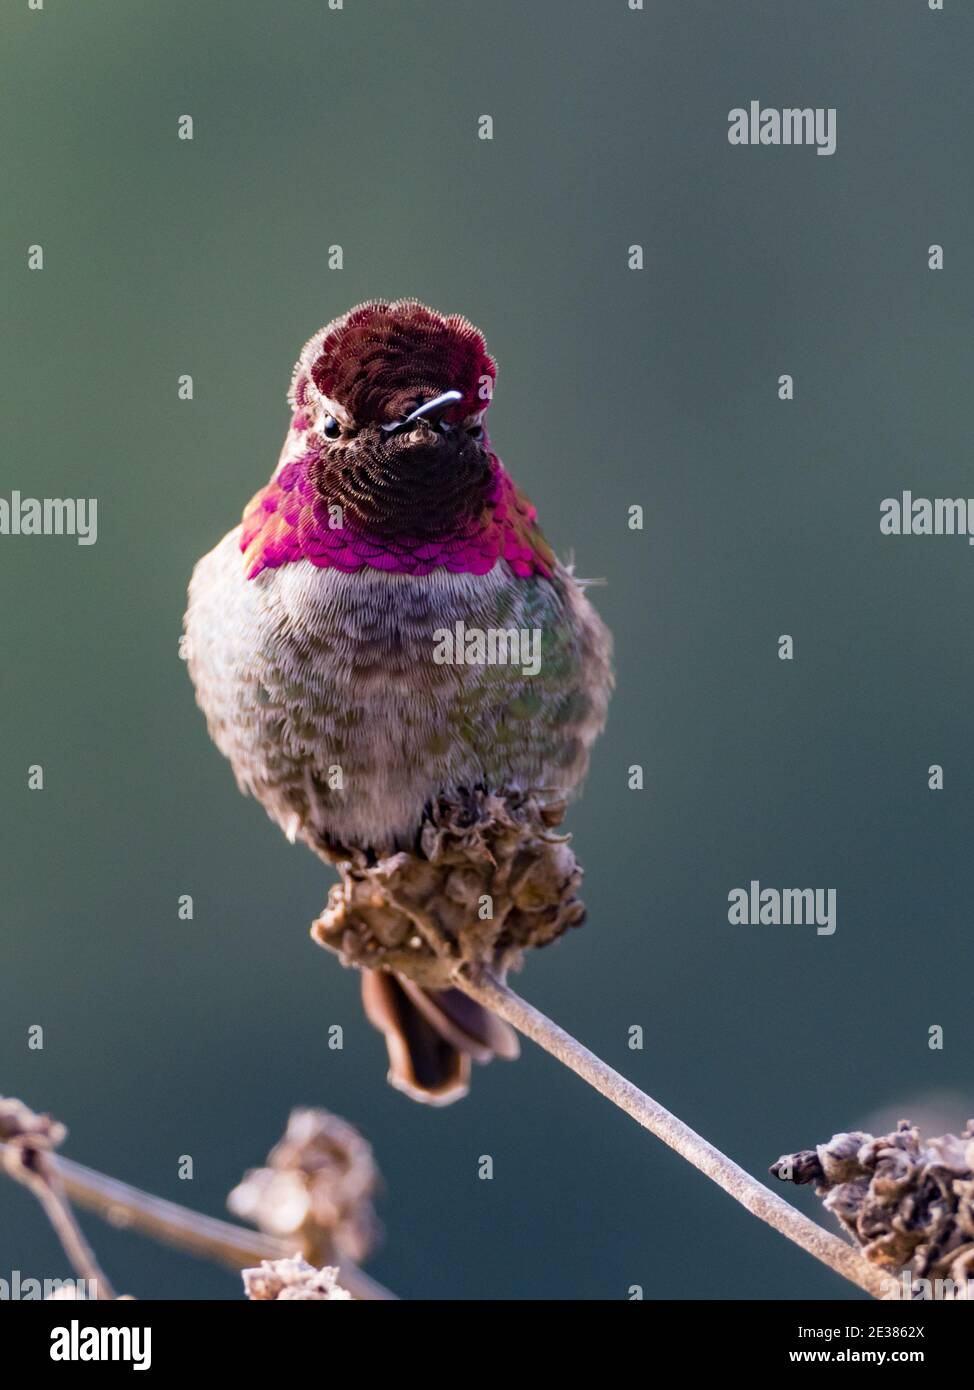 Anna's Hummingbird, Calypte anna, a bird showing its bright gorgeous gorget feathers in La Jolla, California, USA Stock Photo